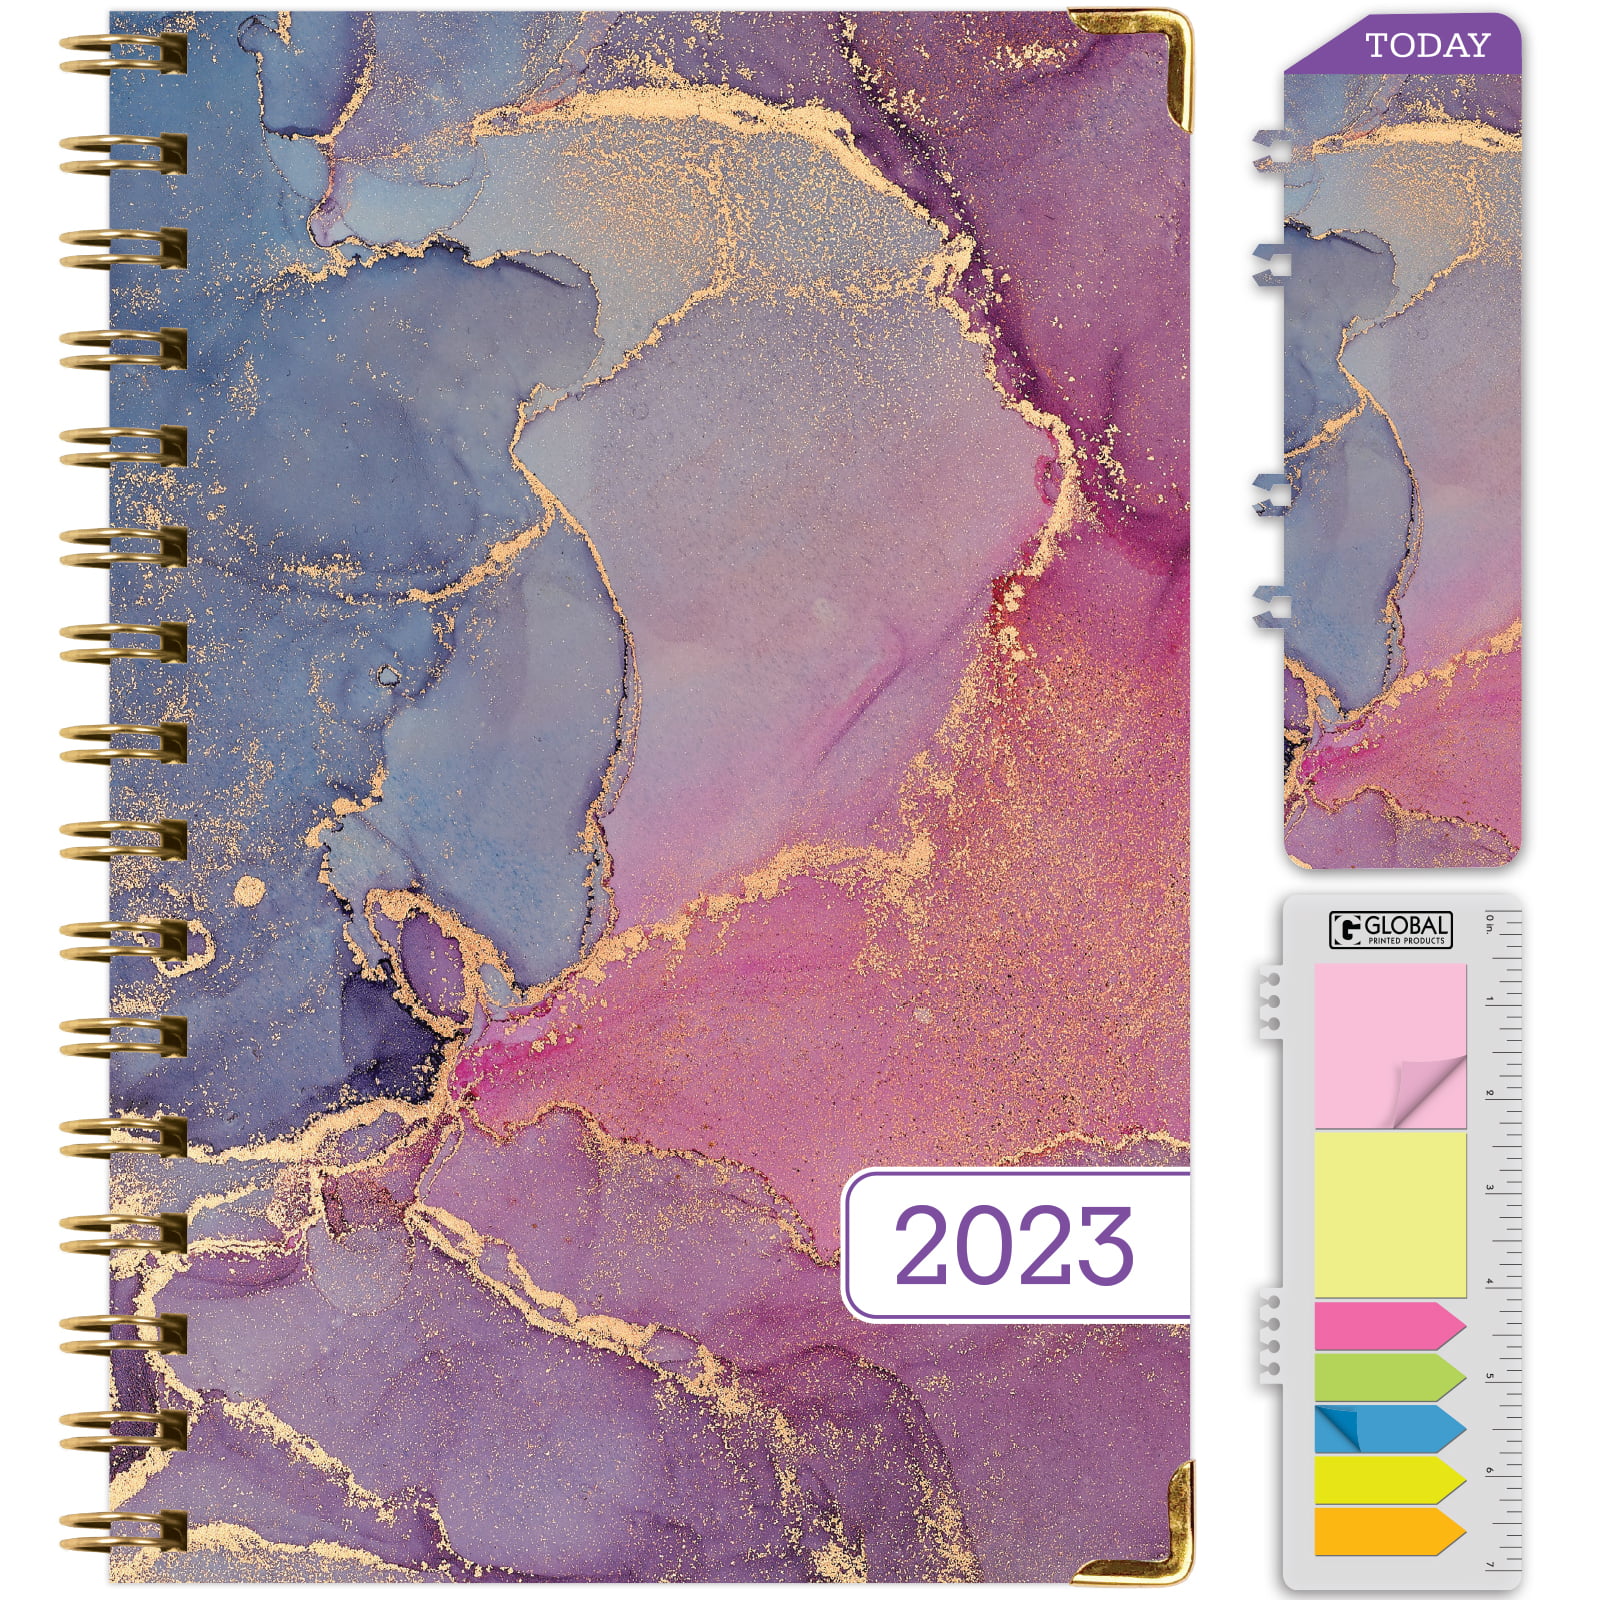 June 2021 Through July 2022 Pocket Folder and Sticky Note Set HARDCOVER Academic Year 2021-2022 Planner: Pink Mosaic Triangle Bookmark 5.5x8 Daily Weekly Monthly Planner Yearly Agenda 